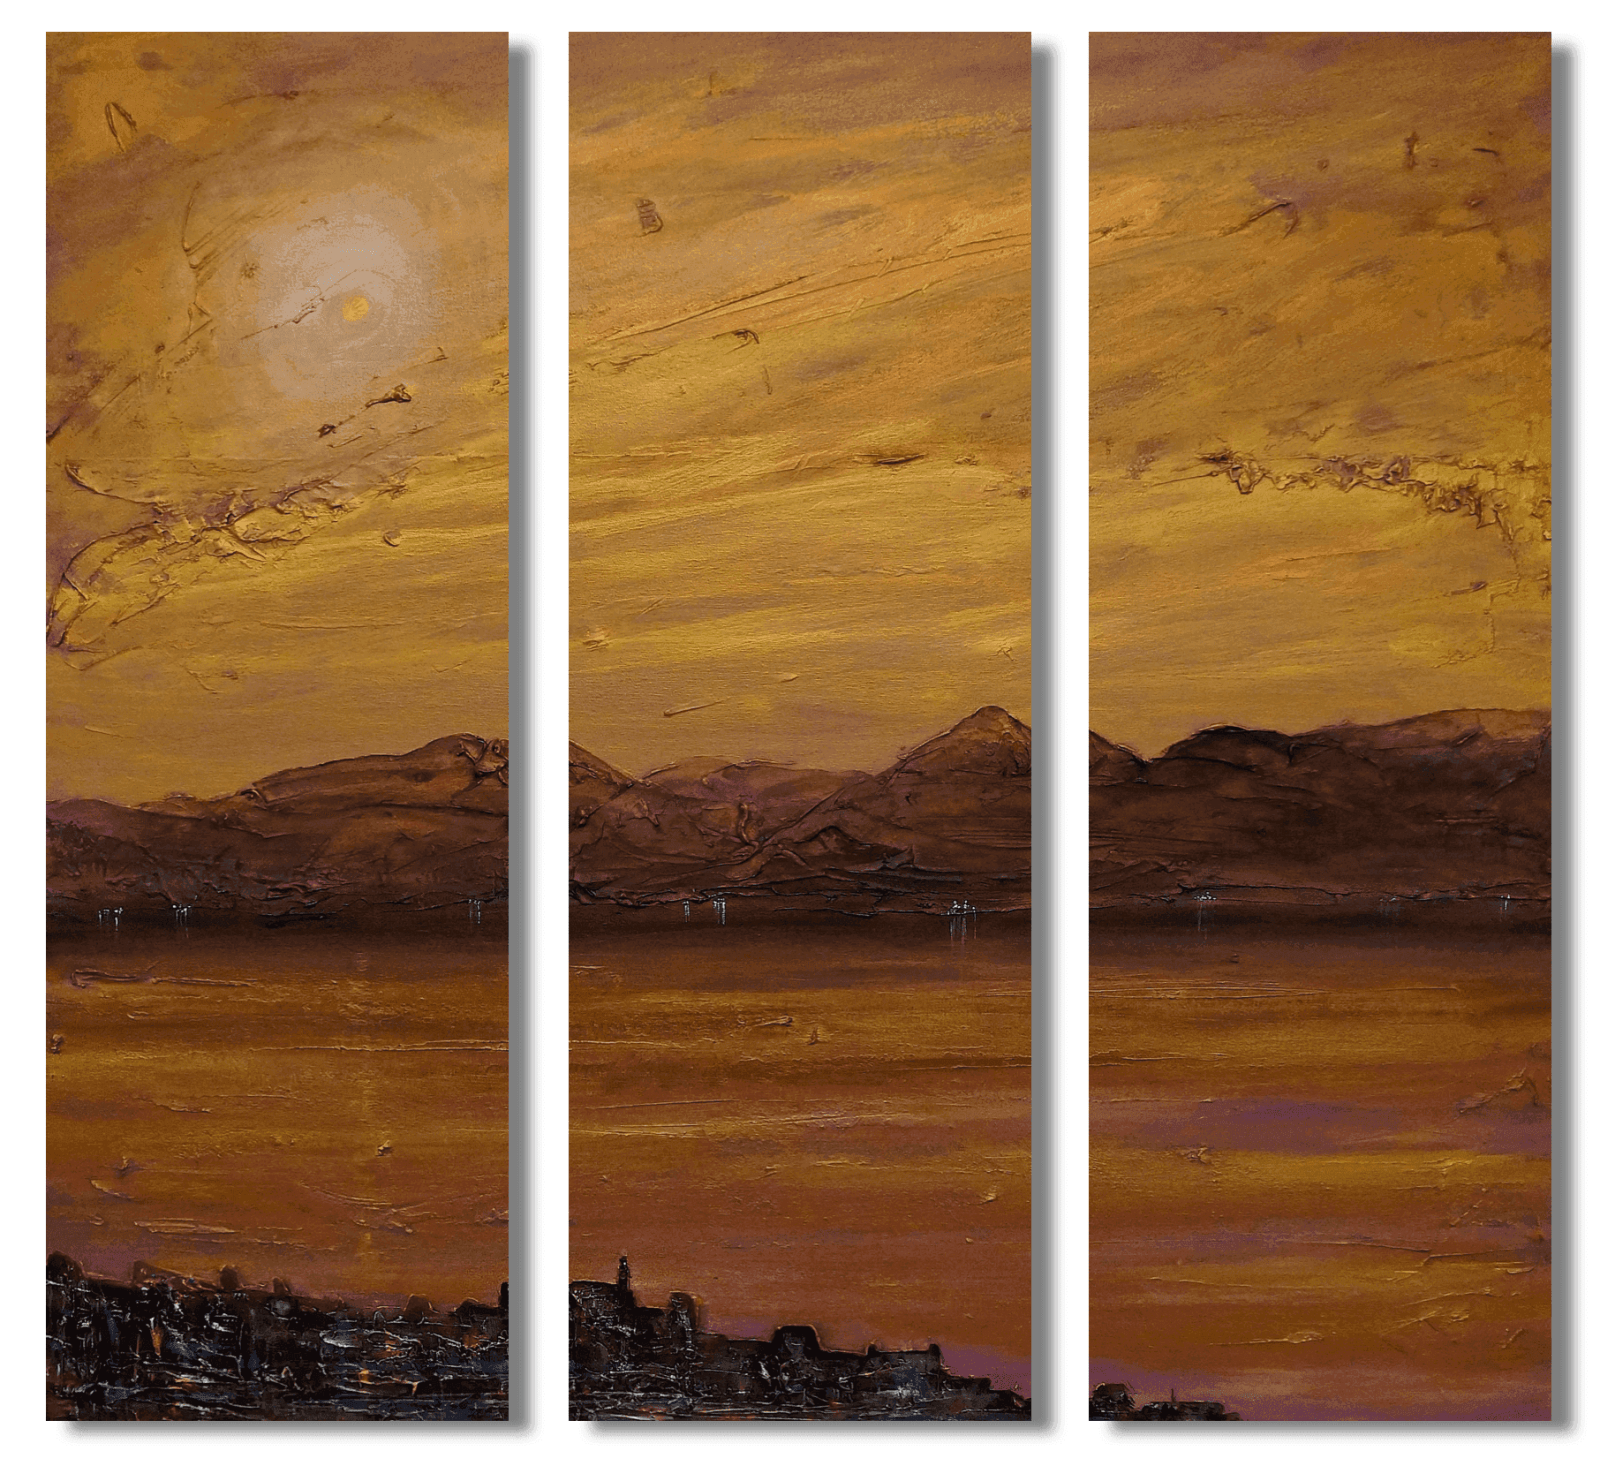 Gourock Autumn Dusk Painting Signed Fine Art Triptych Canvas-Statement Wall Art-River Clyde Art Gallery-Paintings, Prints, Homeware, Art Gifts From Scotland By Scottish Artist Kevin Hunter